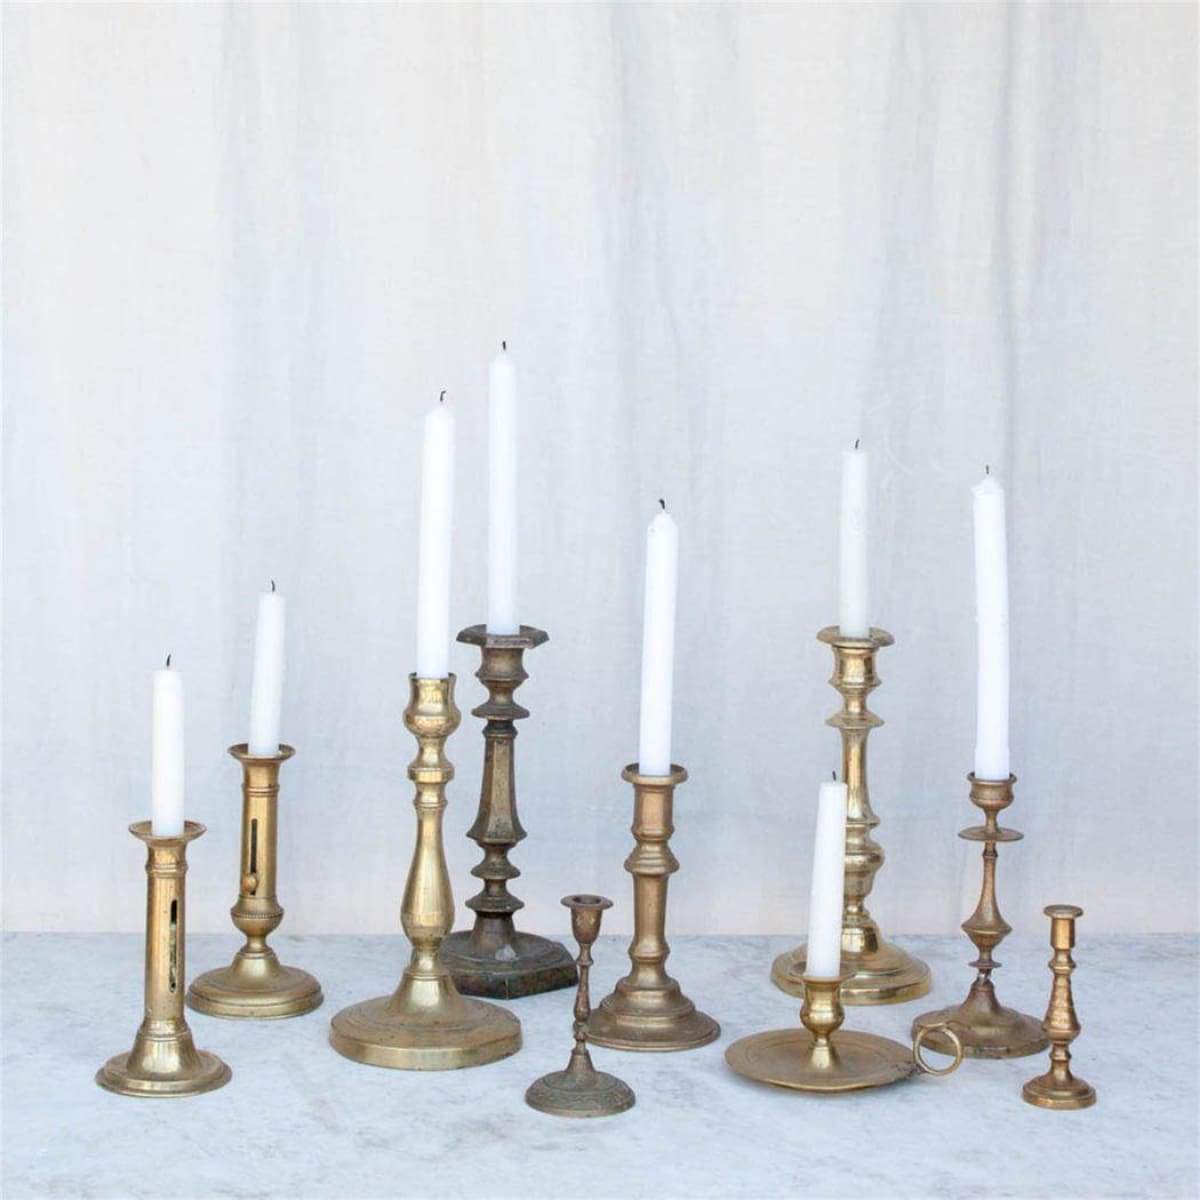 Vintage Etched Brass Candle Holders // Set of 3 Small Skinny Brass  Candlestick Holders -  Canada